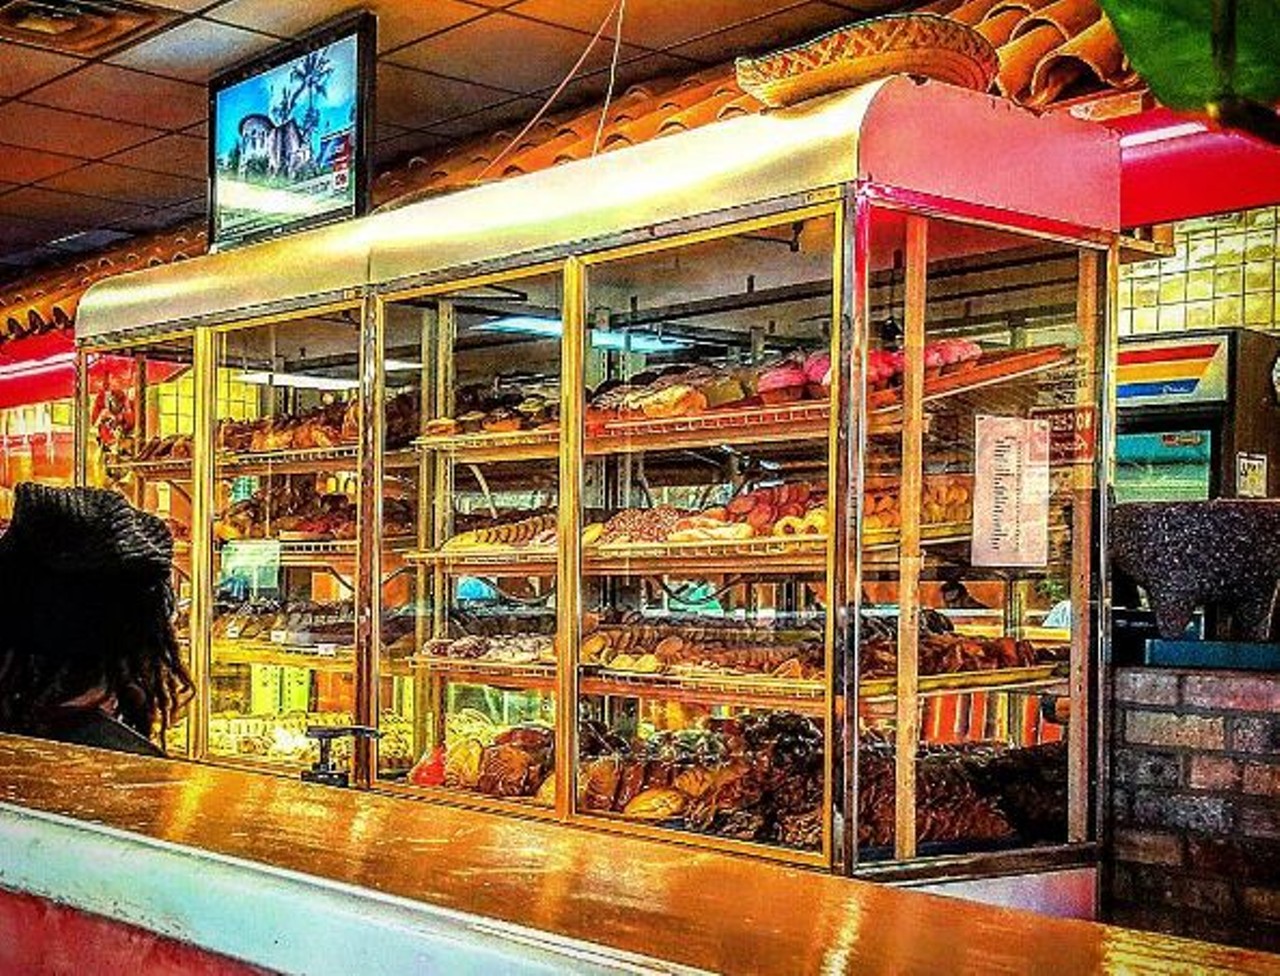 Las Carretas
3975 Perrin Central Blvd., (210) 590-6254
We know it&#146;s not a bakery, but the pan dulce is a must try. Huge displays in the restaurant tempt you while you eat your food. If you can&#146;t make through your meal and wait for dessert, you and abuela can share some pan and call it an appetizer.
Photo via Instagram, keith_diarmit